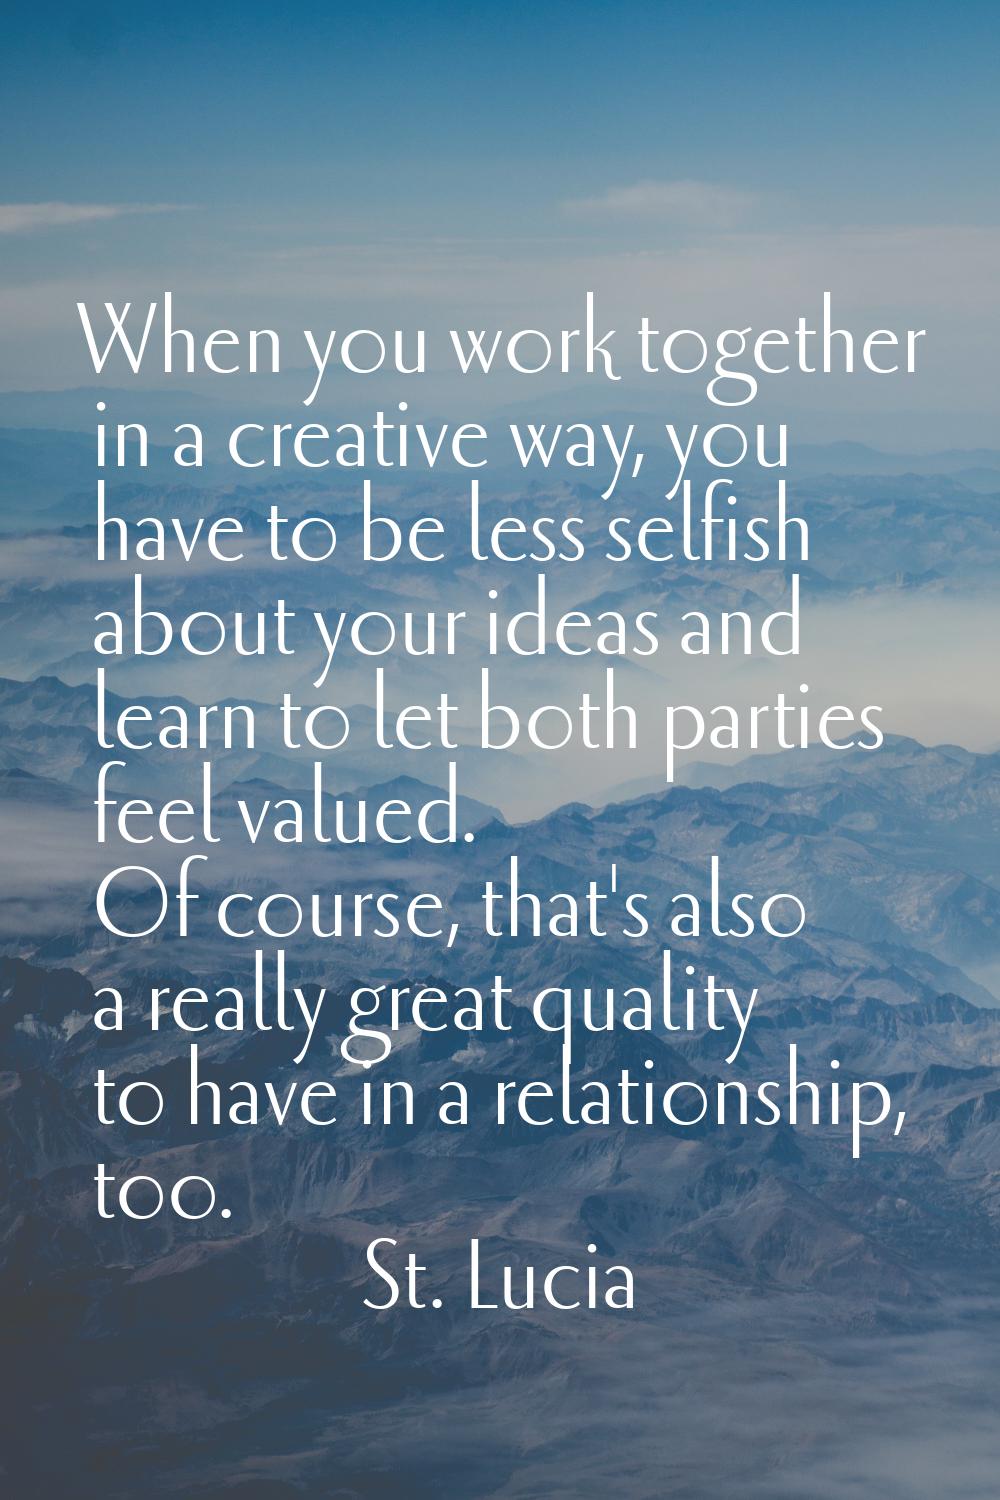 When you work together in a creative way, you have to be less selfish about your ideas and learn to